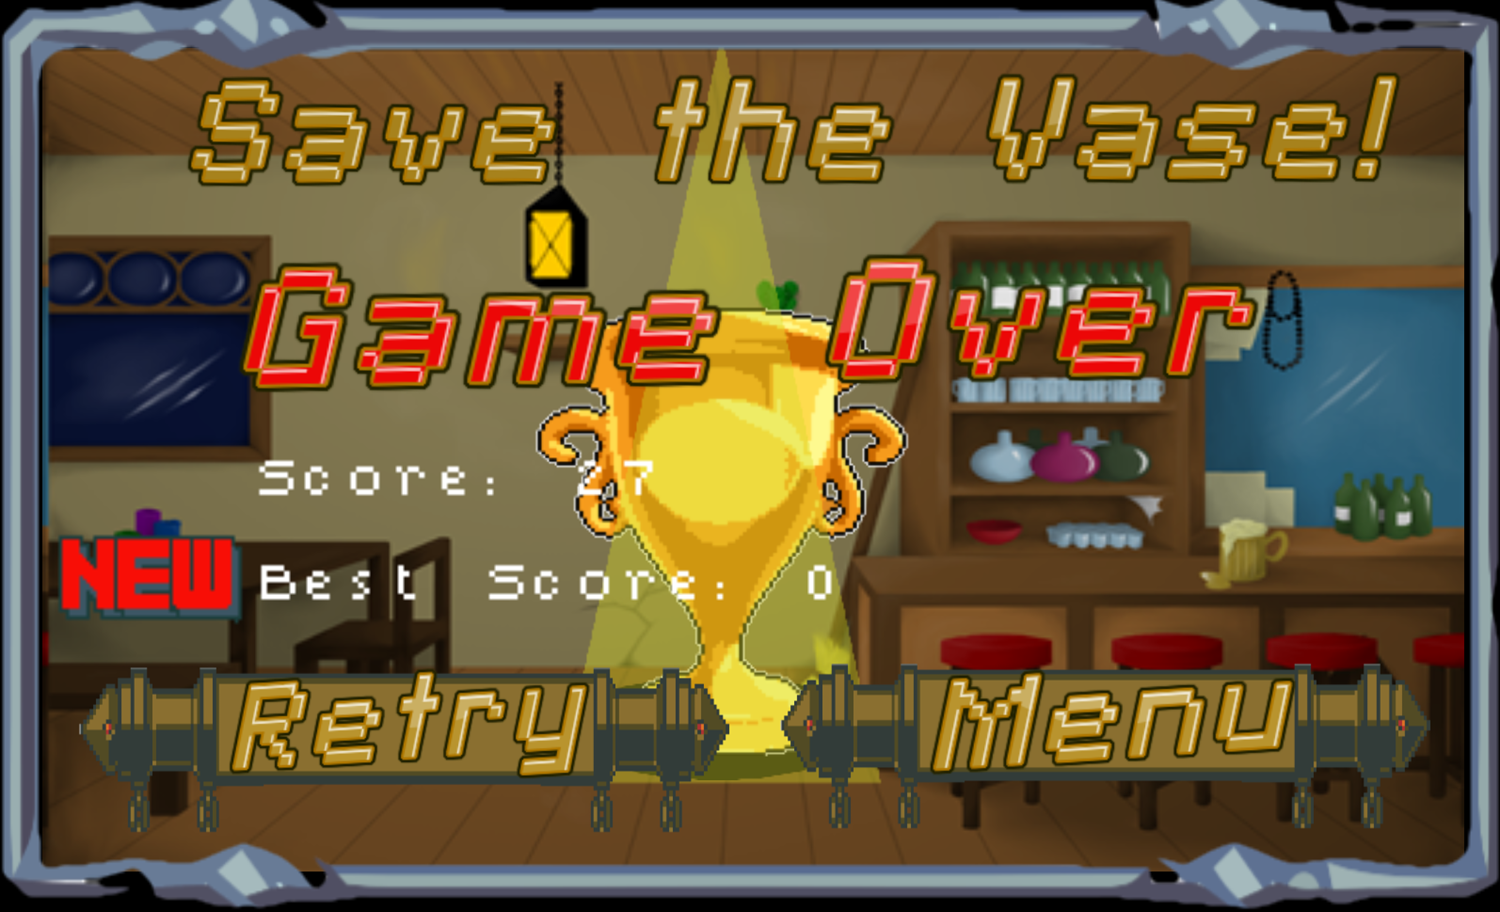 Save The Vase Game Over Screenshot.